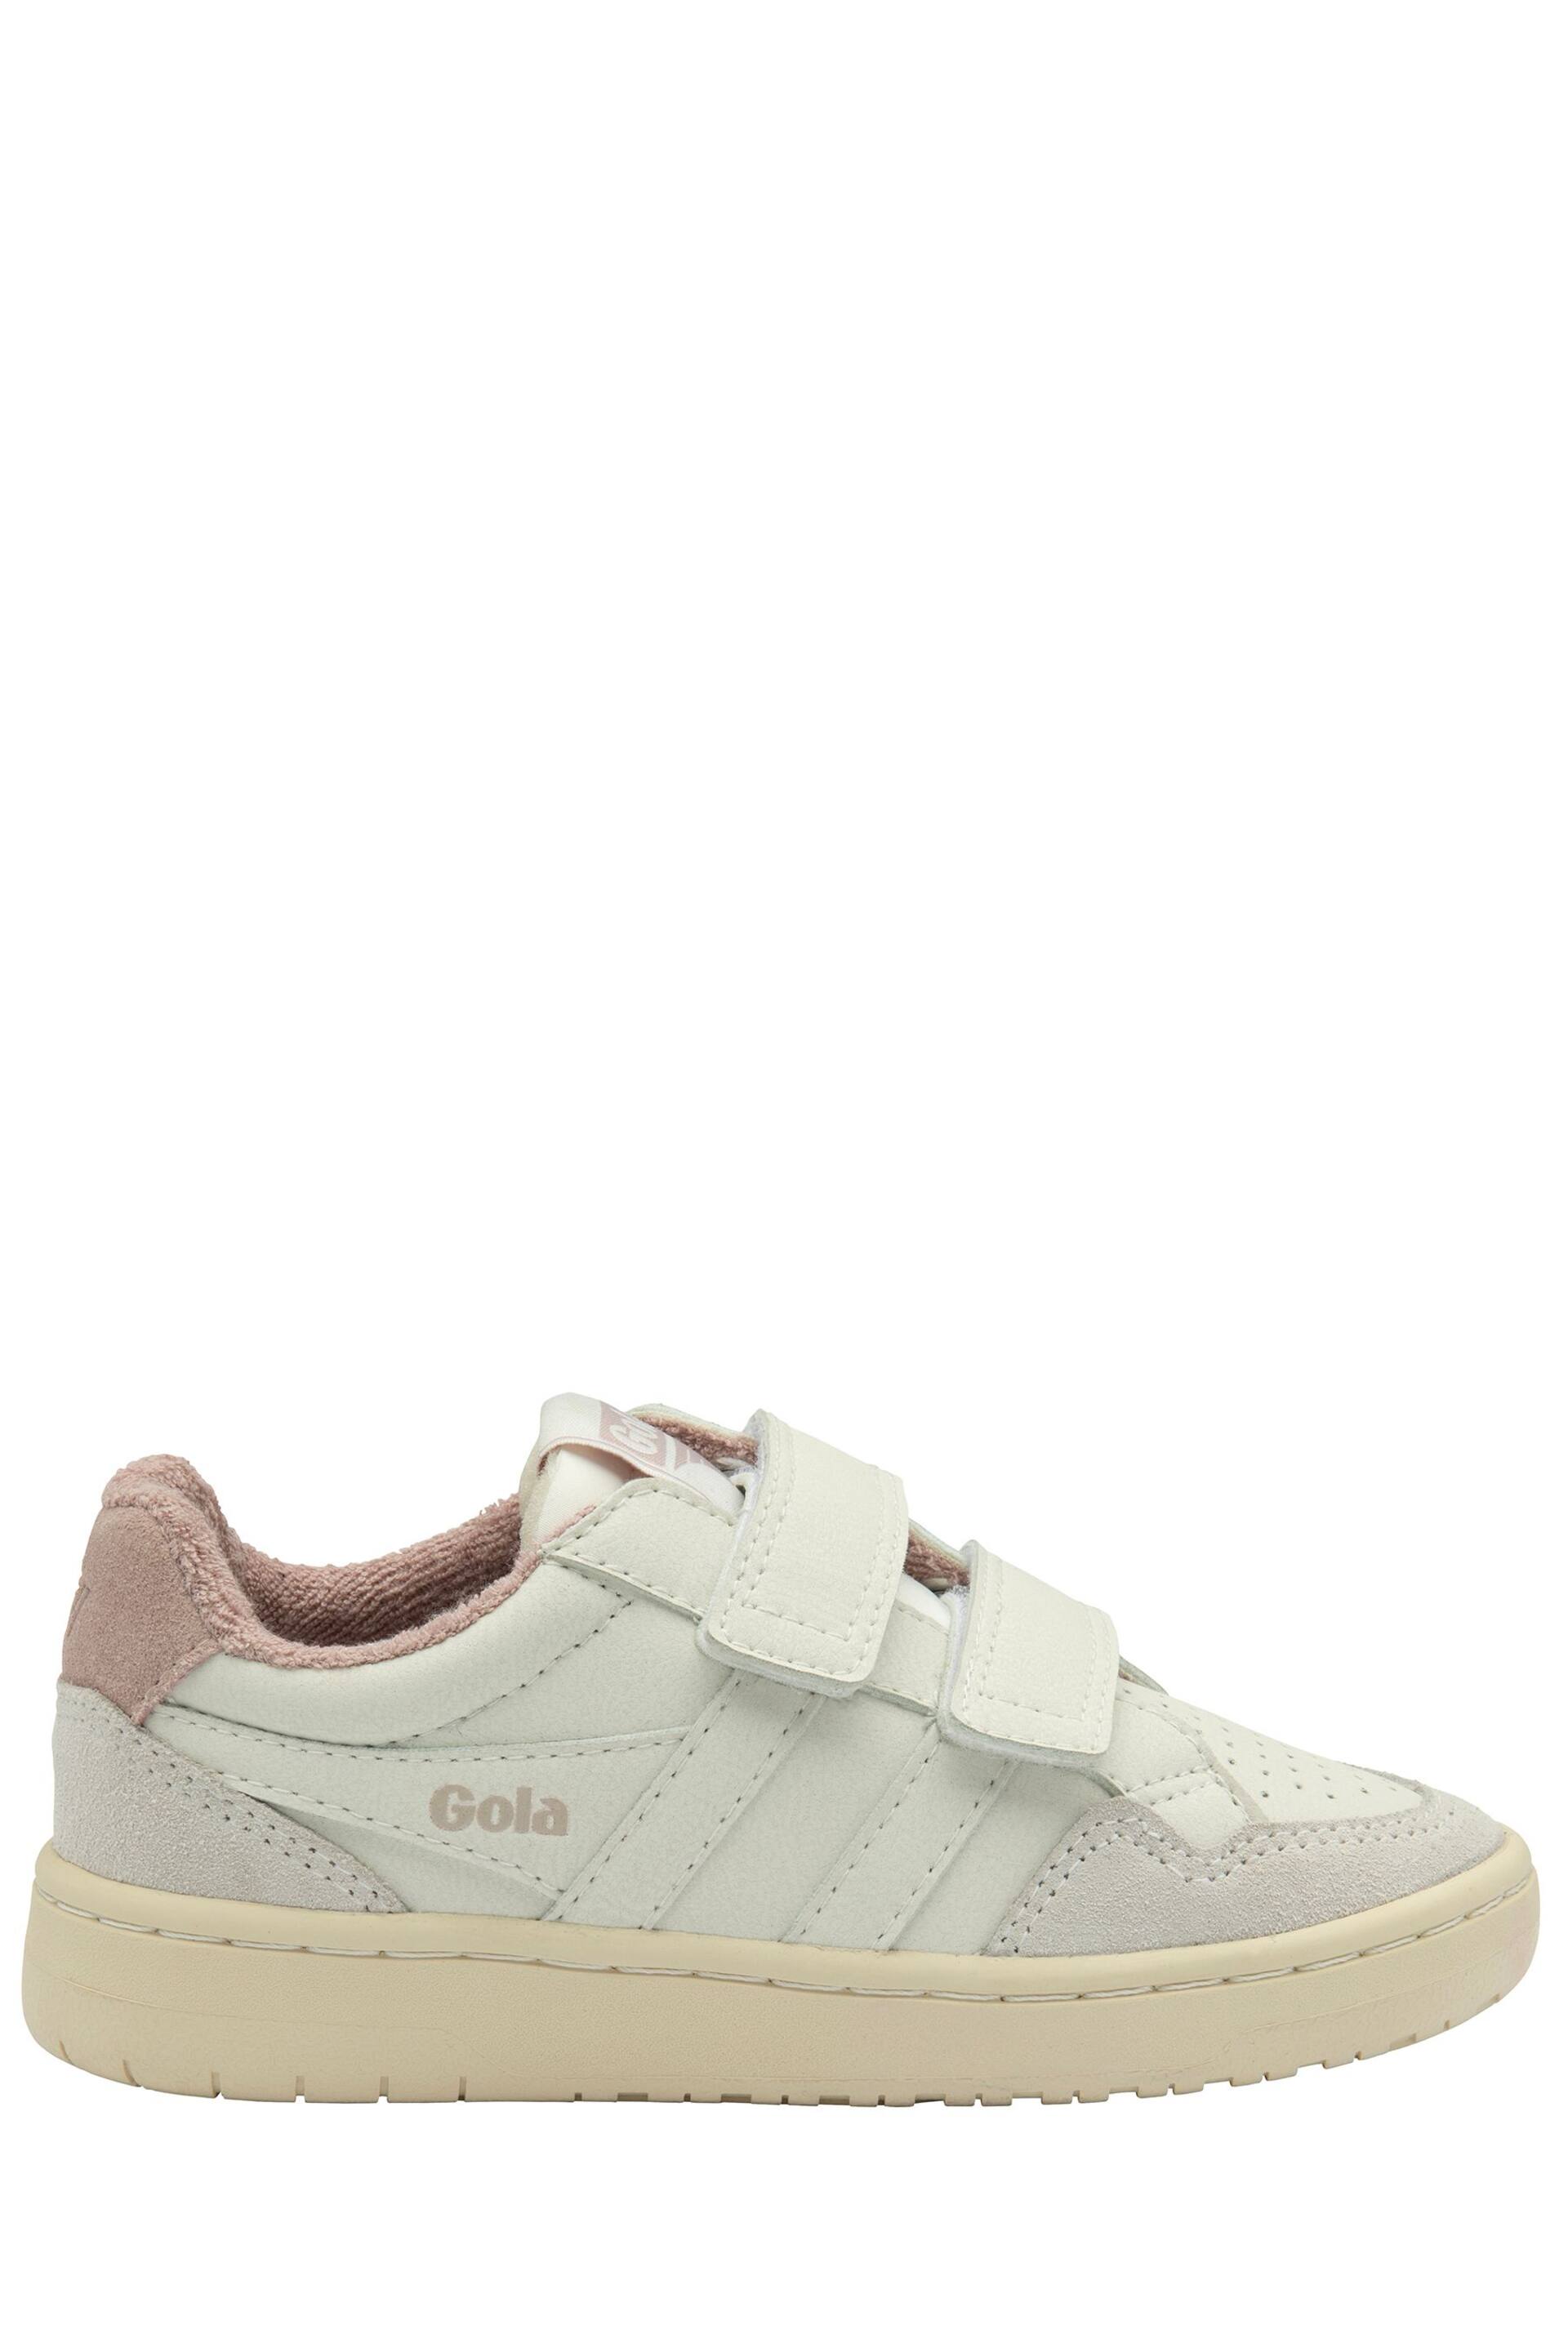 Gola Off White/Peony Kids Eagle Strap Trainers - Image 1 of 4